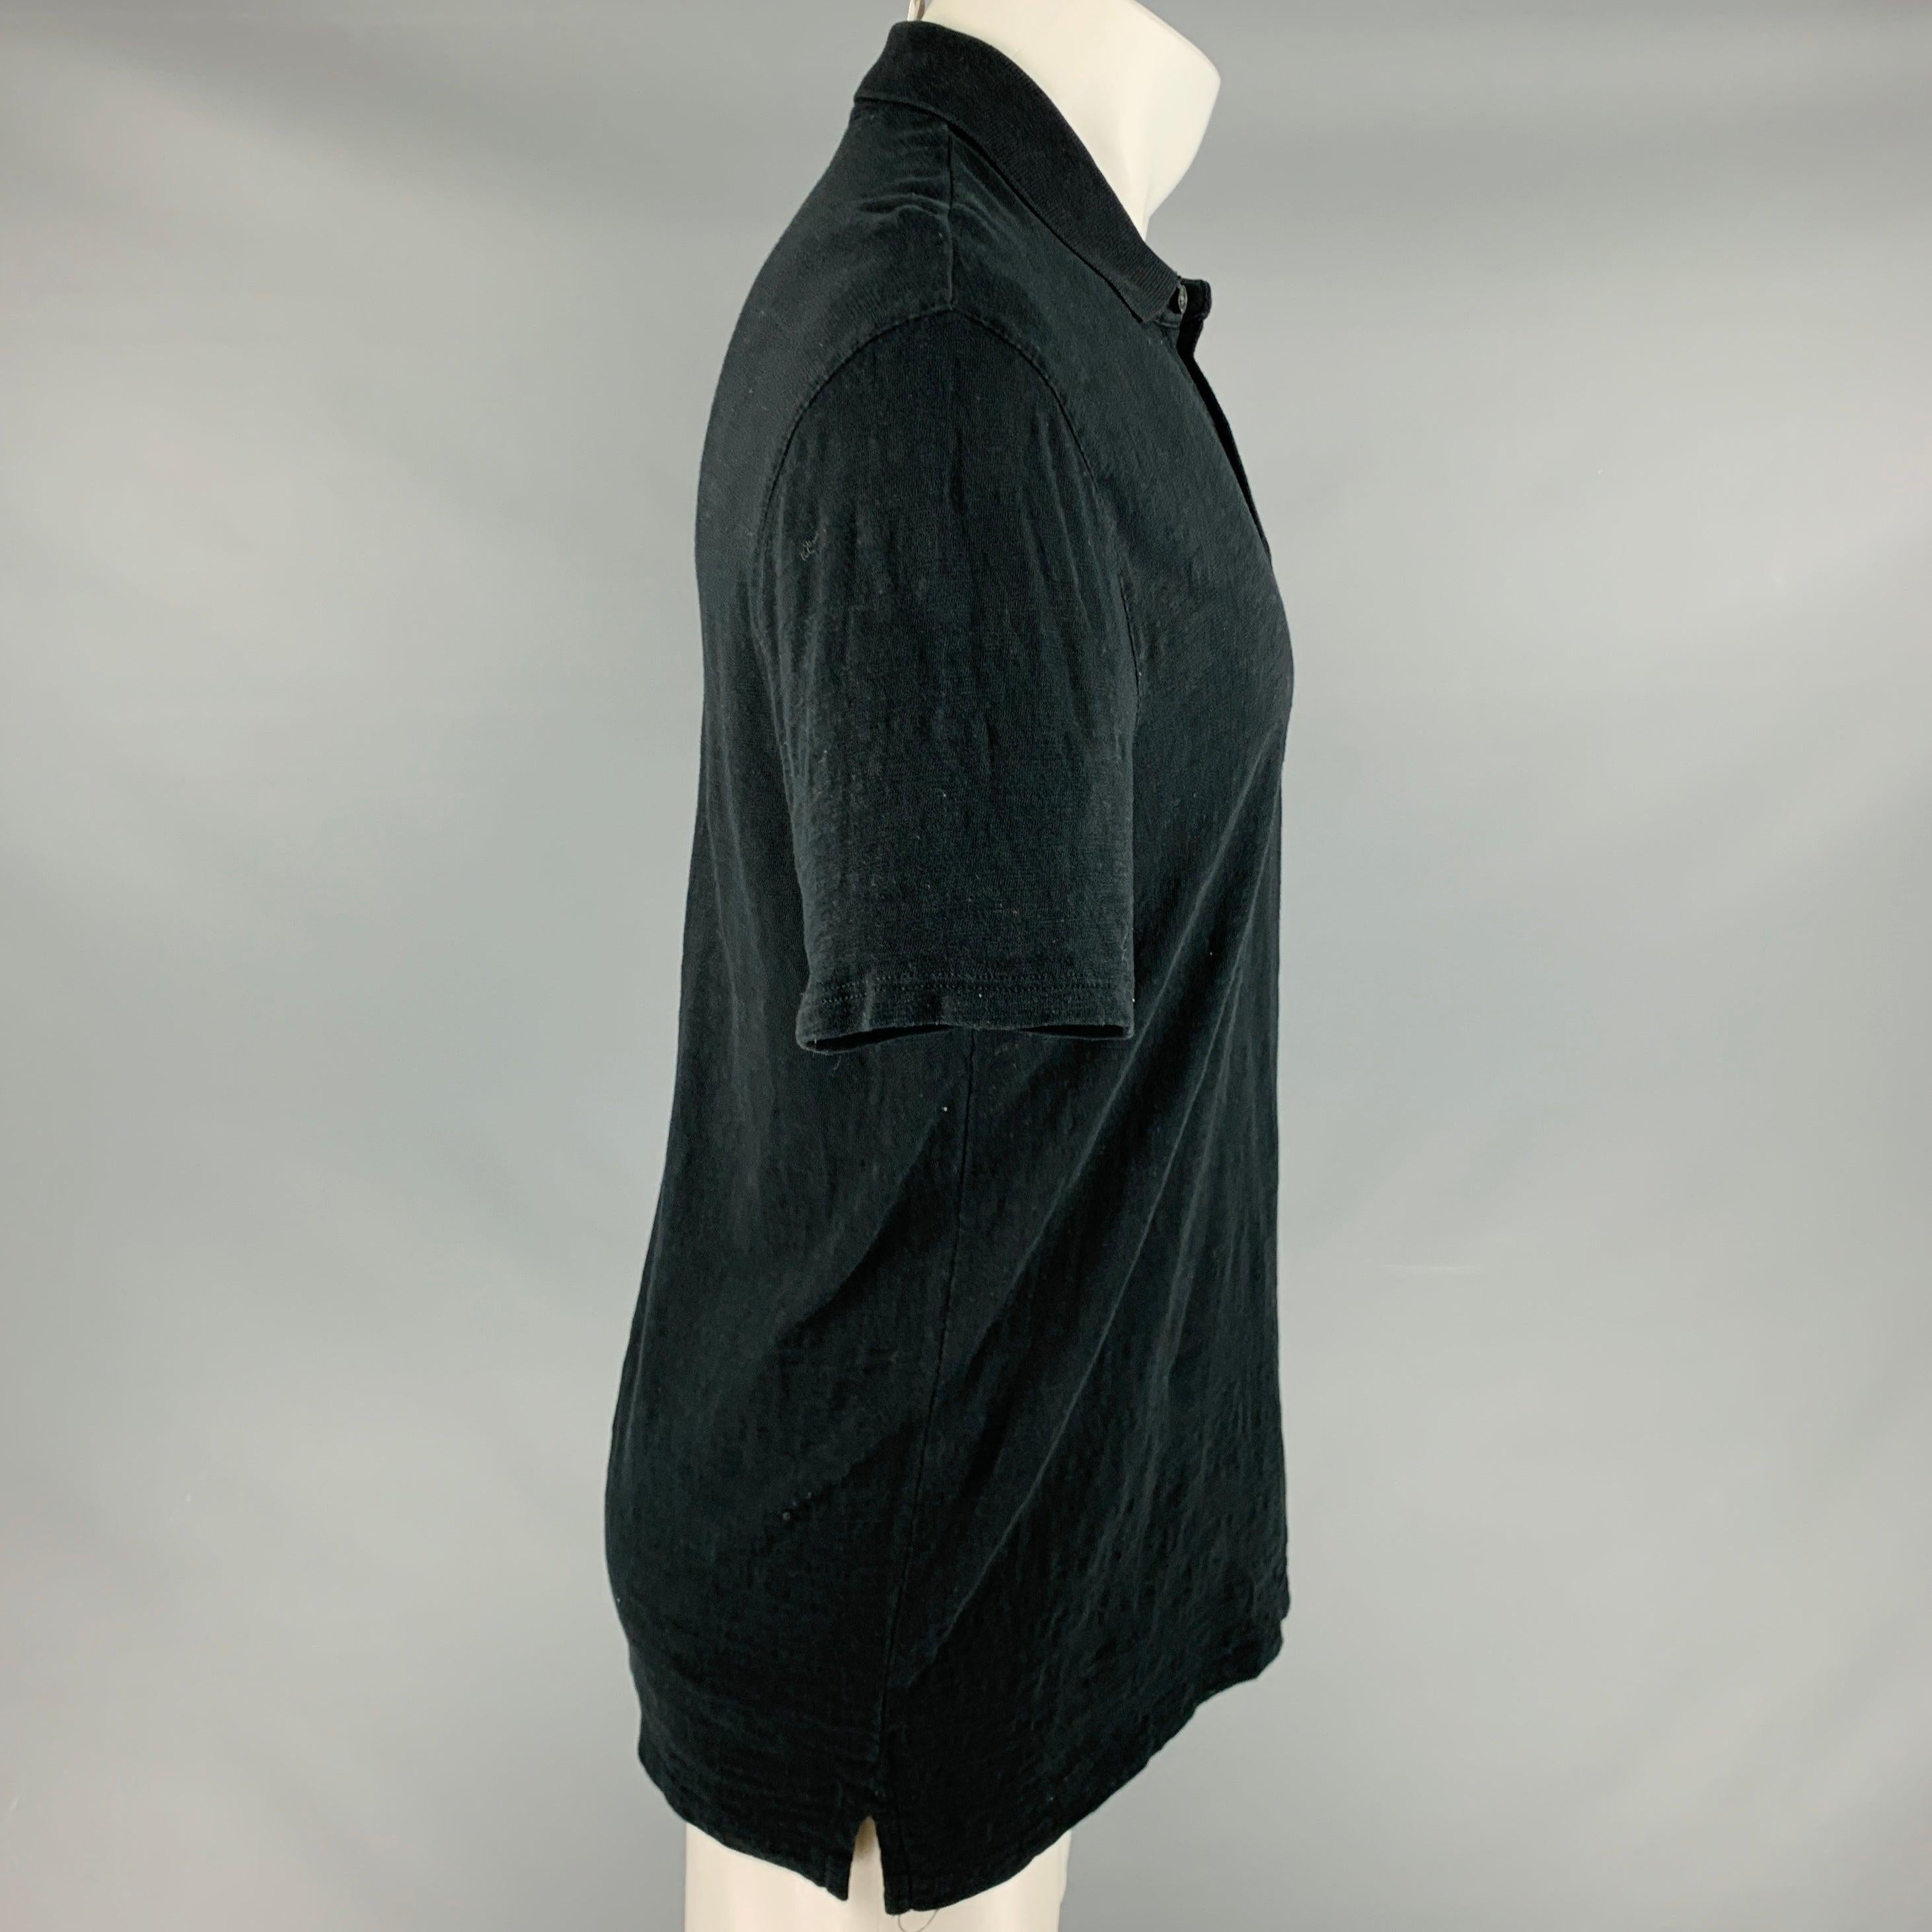 VINCE polo
in a black cotton knit featuring short sleeves and half placket button closure.Very Good Pre-Owned Condition. Minor mark on front. 

Marked:   M 

Measurements: 
 
Shoulder: 19.5 inches Chest: 39 inches Sleeve: 8.5 inches Length: 28